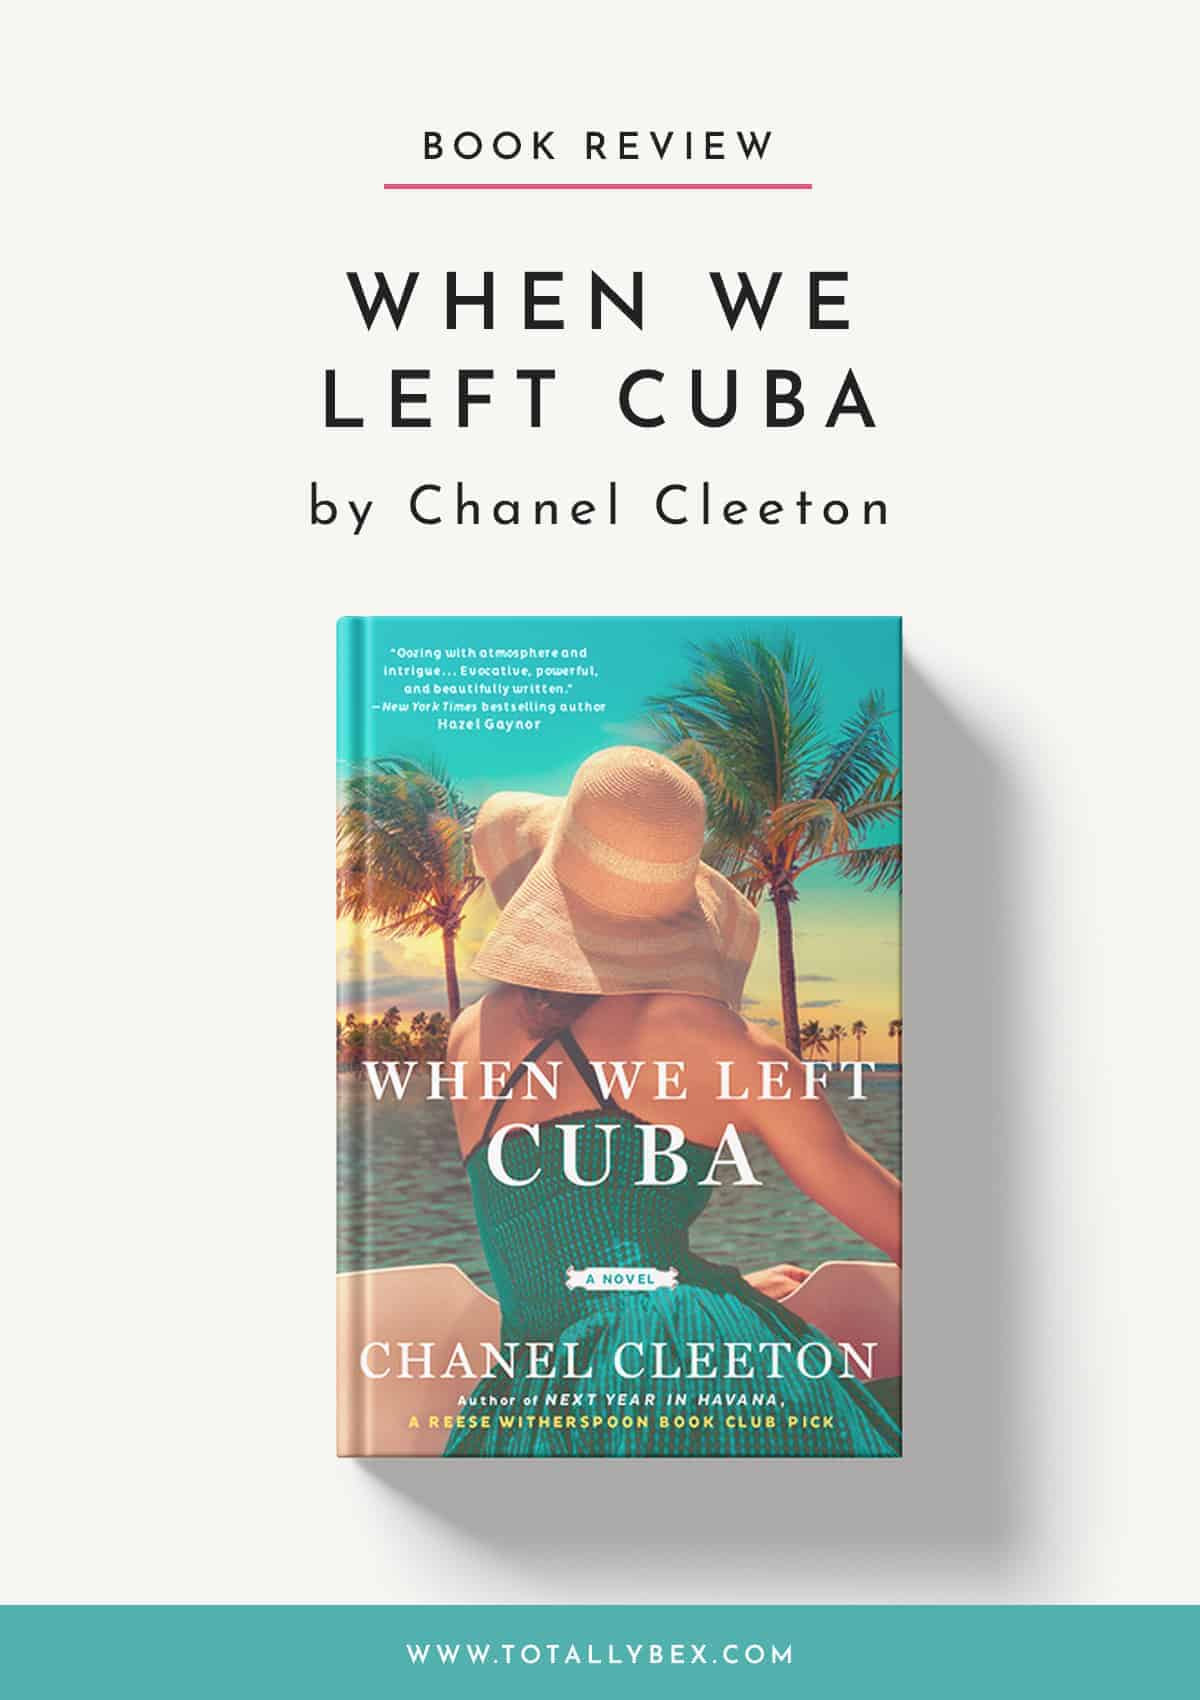 When We Left Cuba by Chanel Cleeton – Glamorous and Intriguing 60s Romance